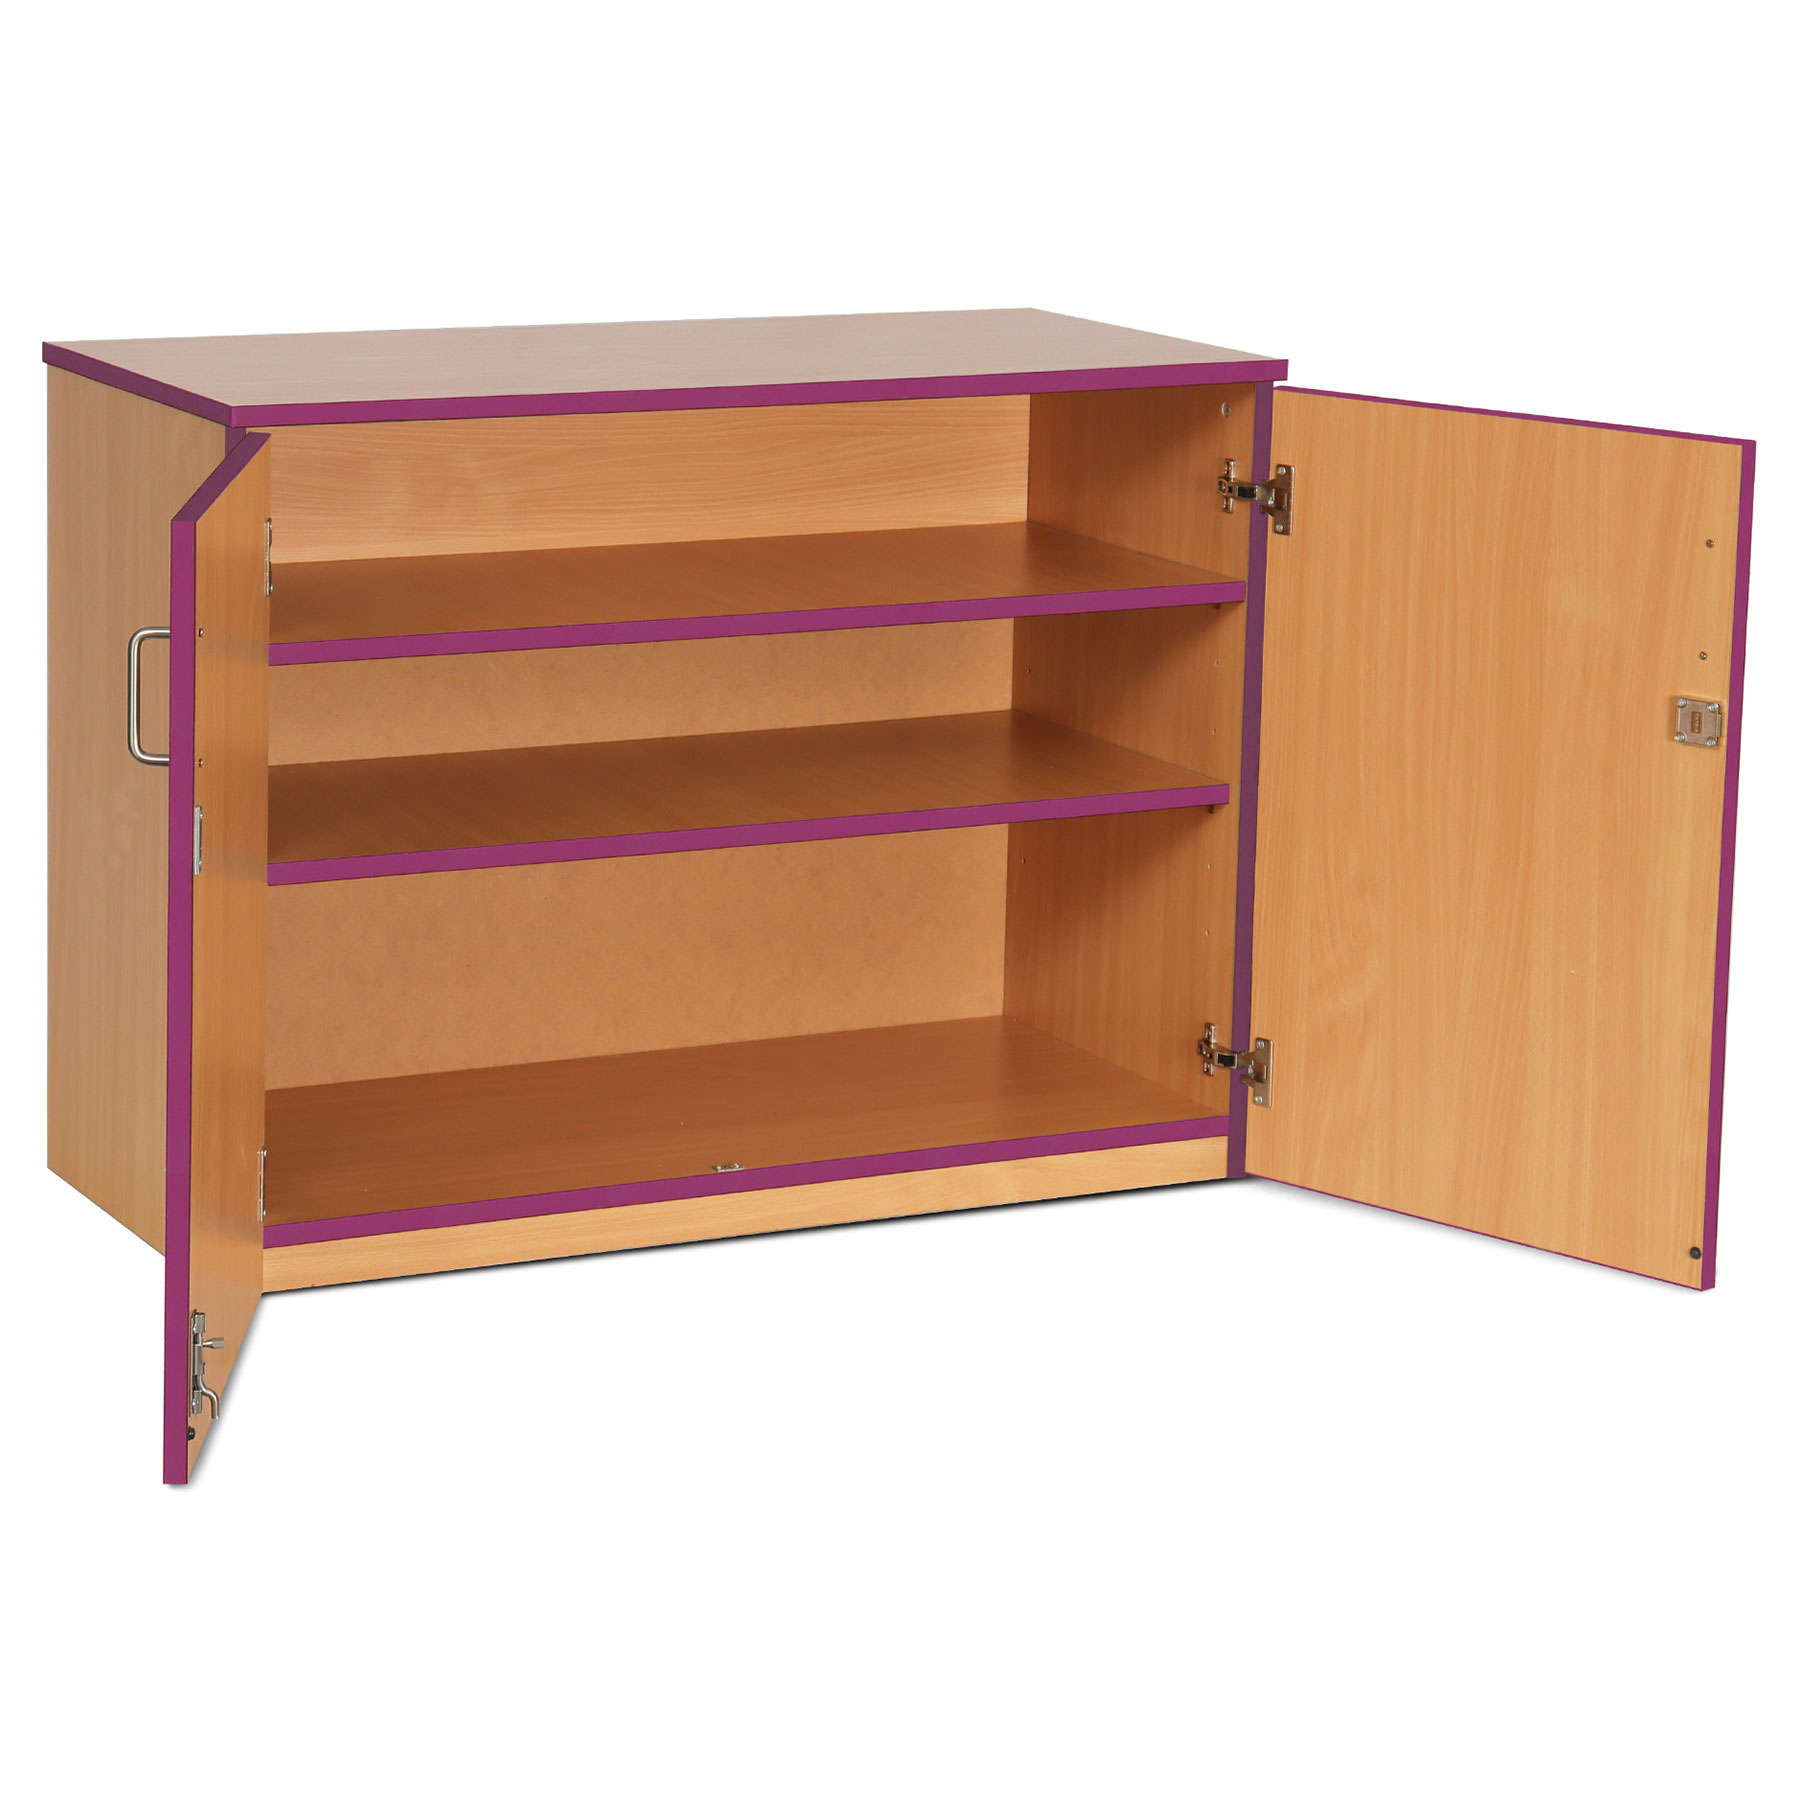 Lockable Cupboard with 2 Shelves & Purple Edging (750H)